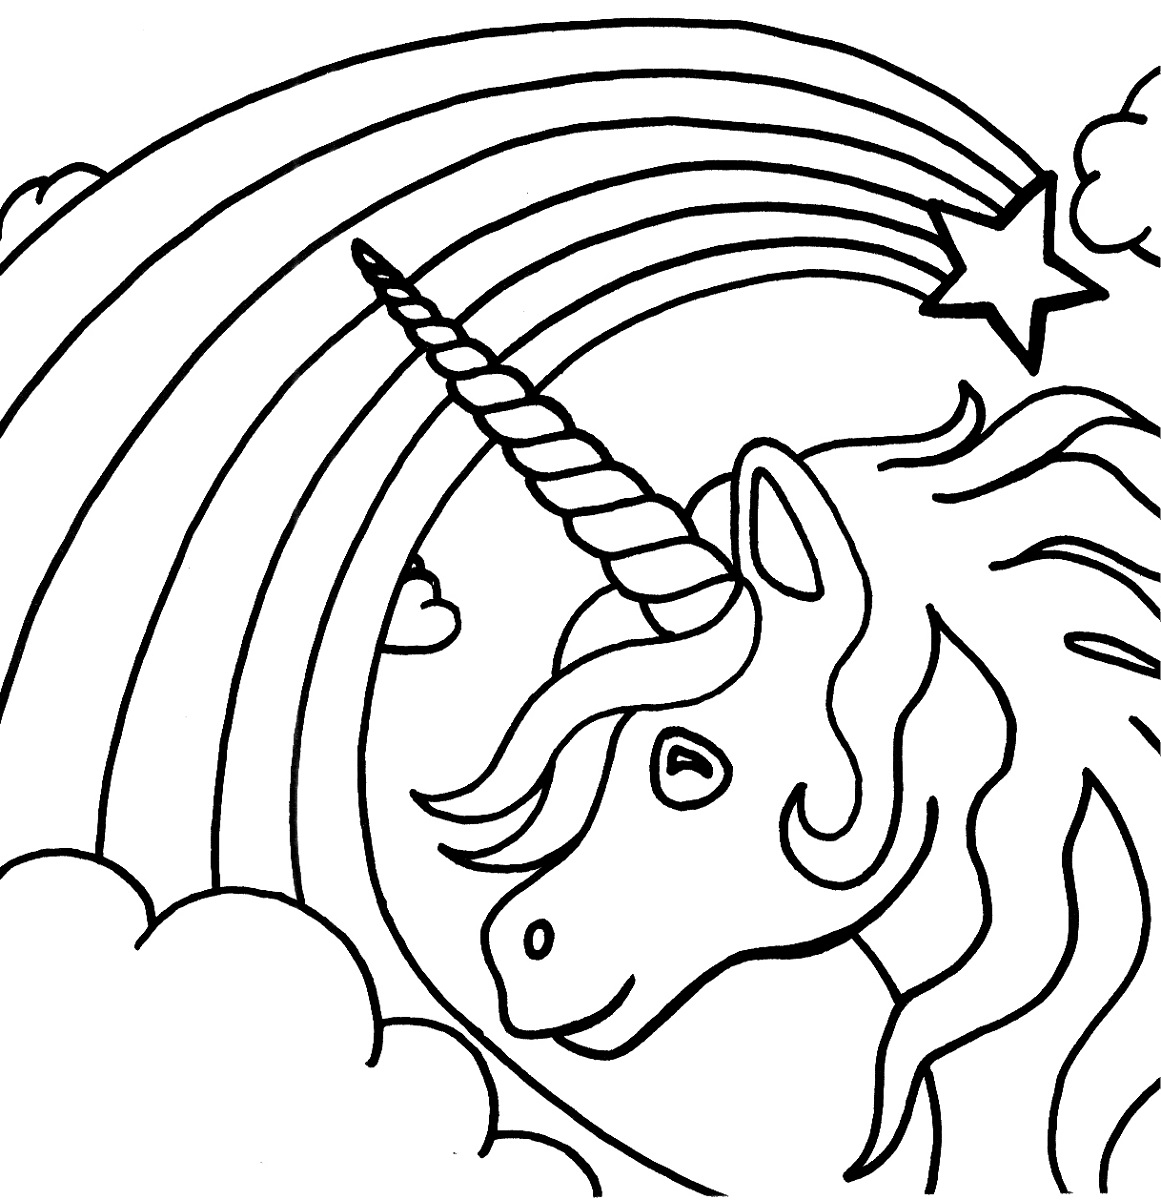 Adult Coloring Pages Unicorn at GetColorings.com | Free ...